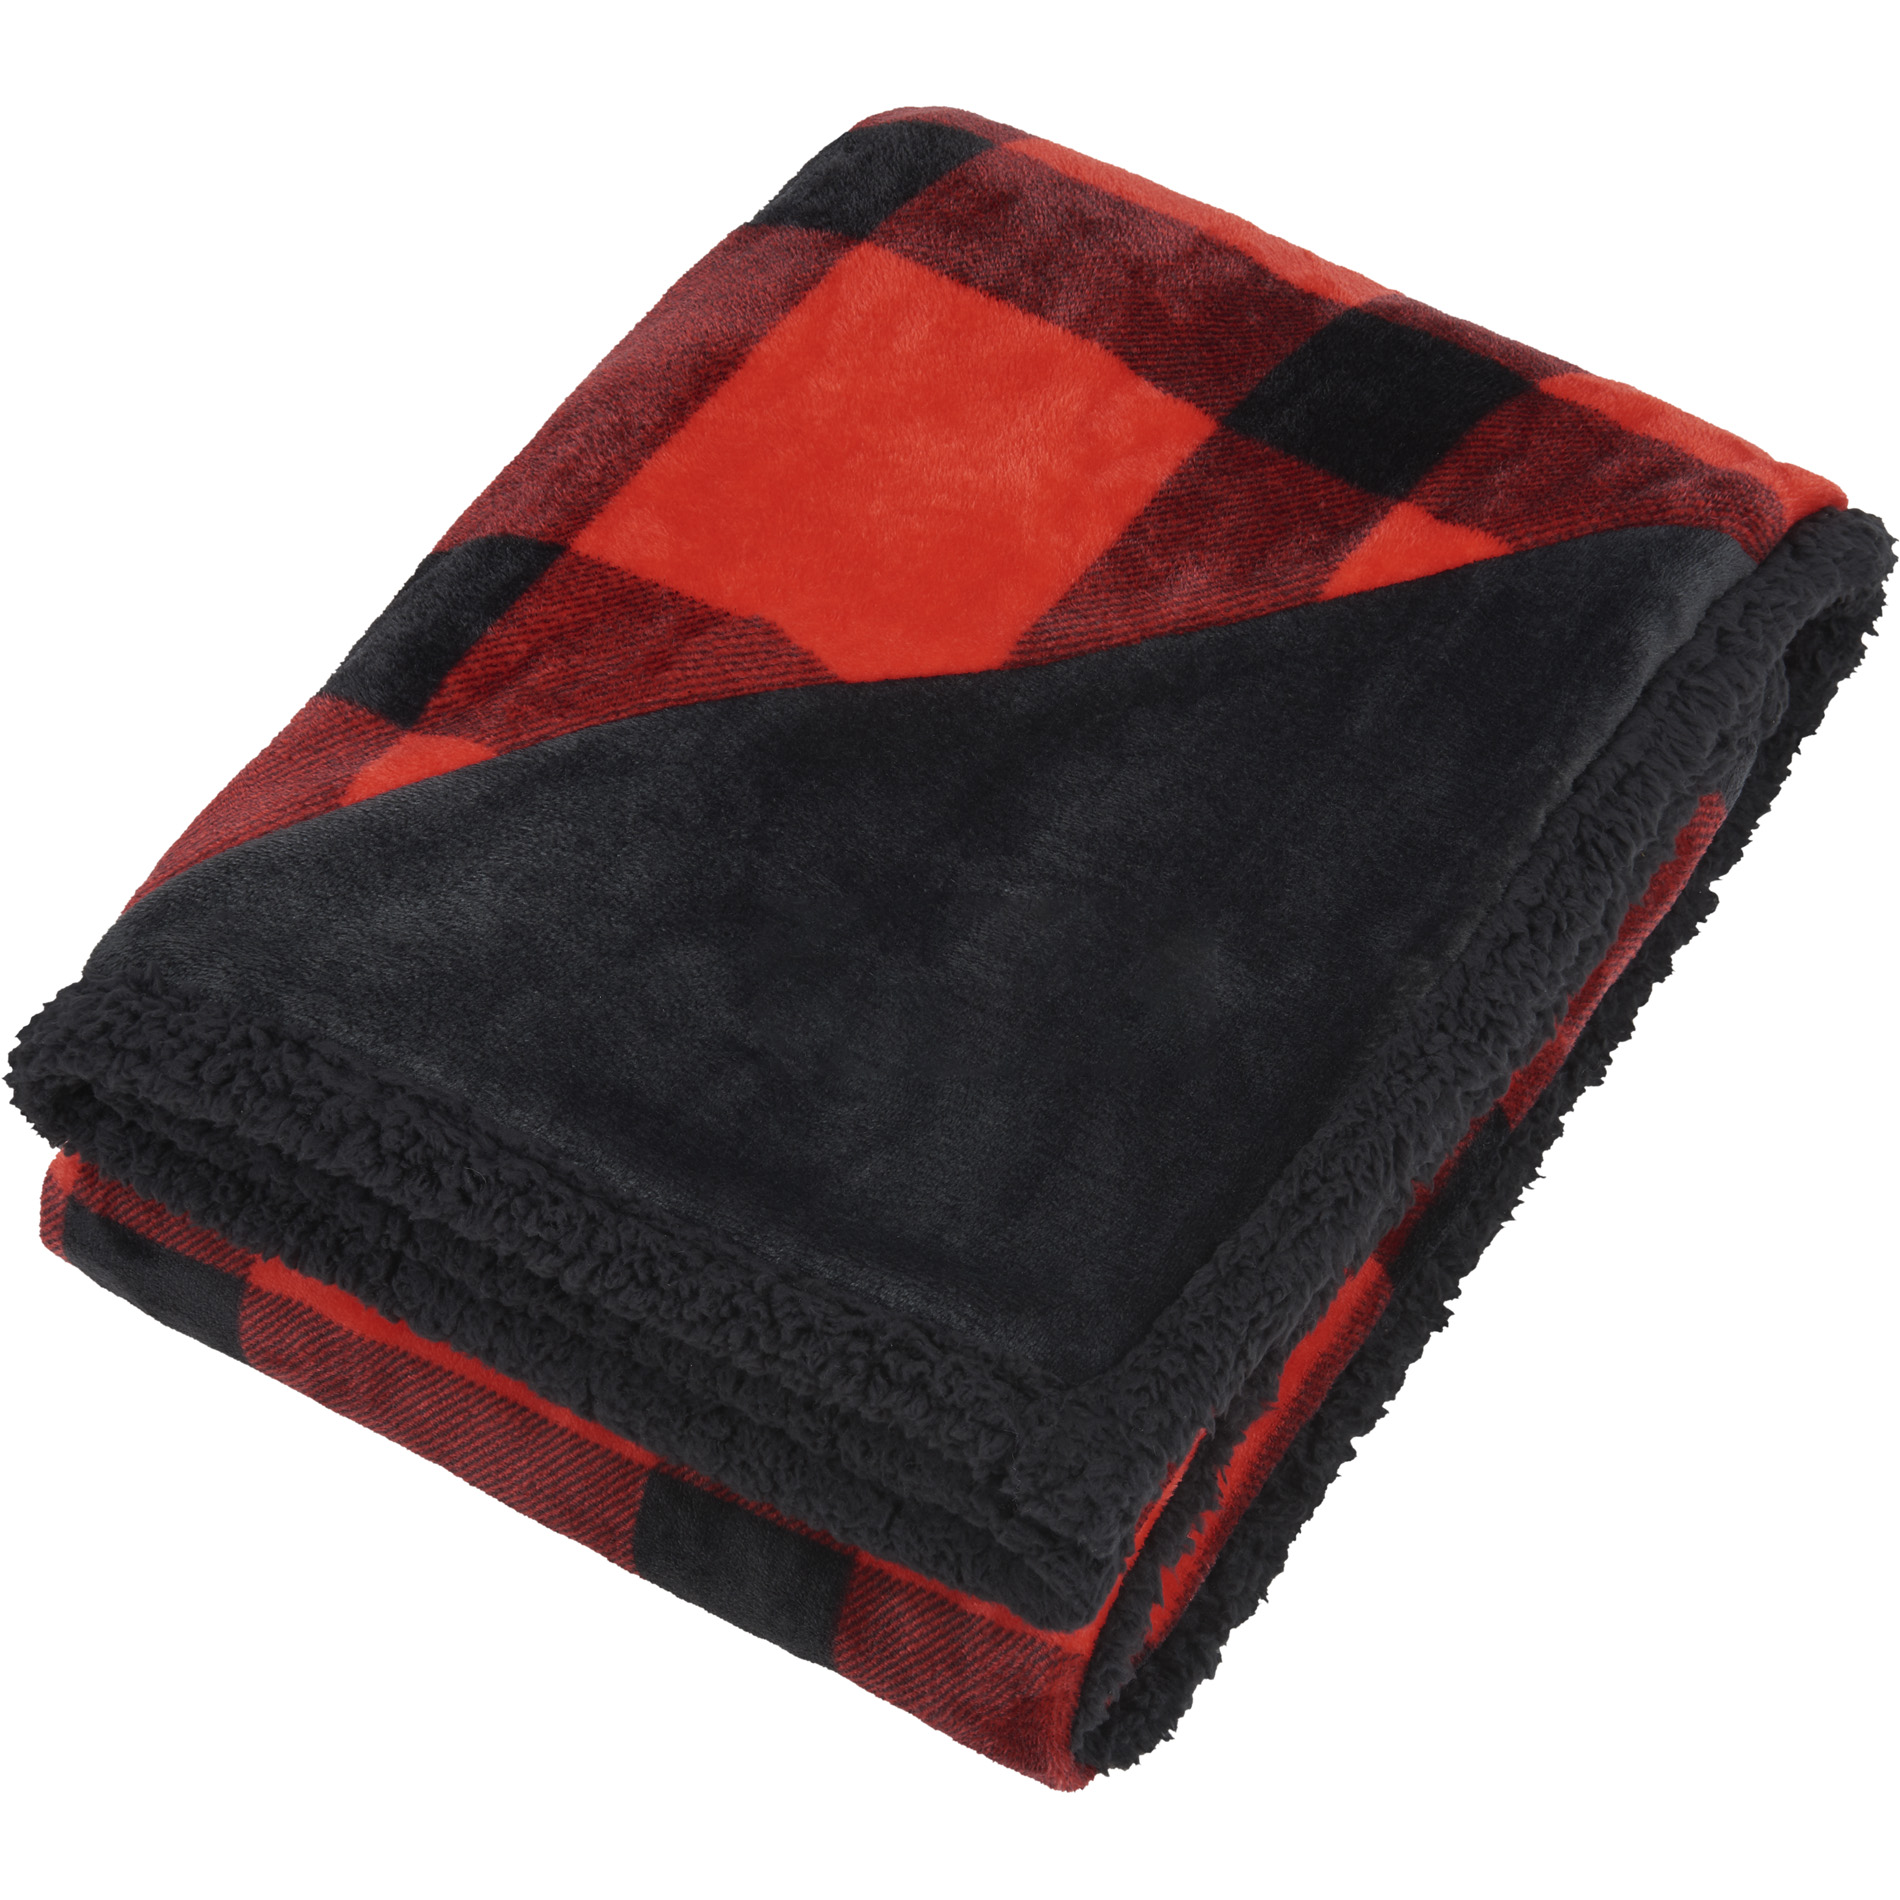 Plush Fleece Fabric for Blankets & Accessories